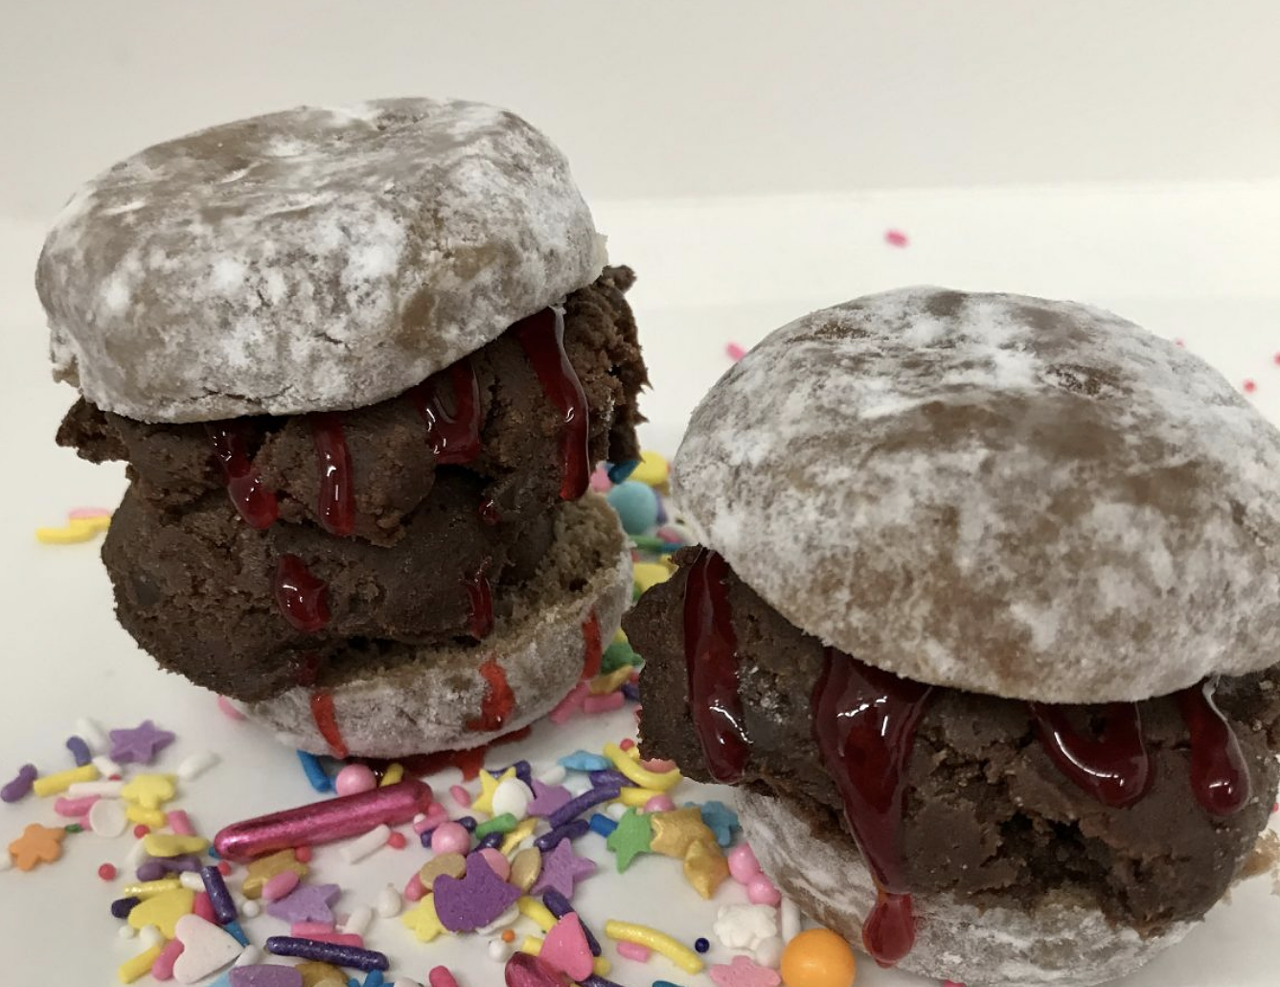 Tres Belle Cakes: Beignet Sliders 
8921 Reading Road, Reading
Two melt-in-your-mouth powdered sugar beignets are filled with edible cookie dough patties. The sweetest burger week deal in town!